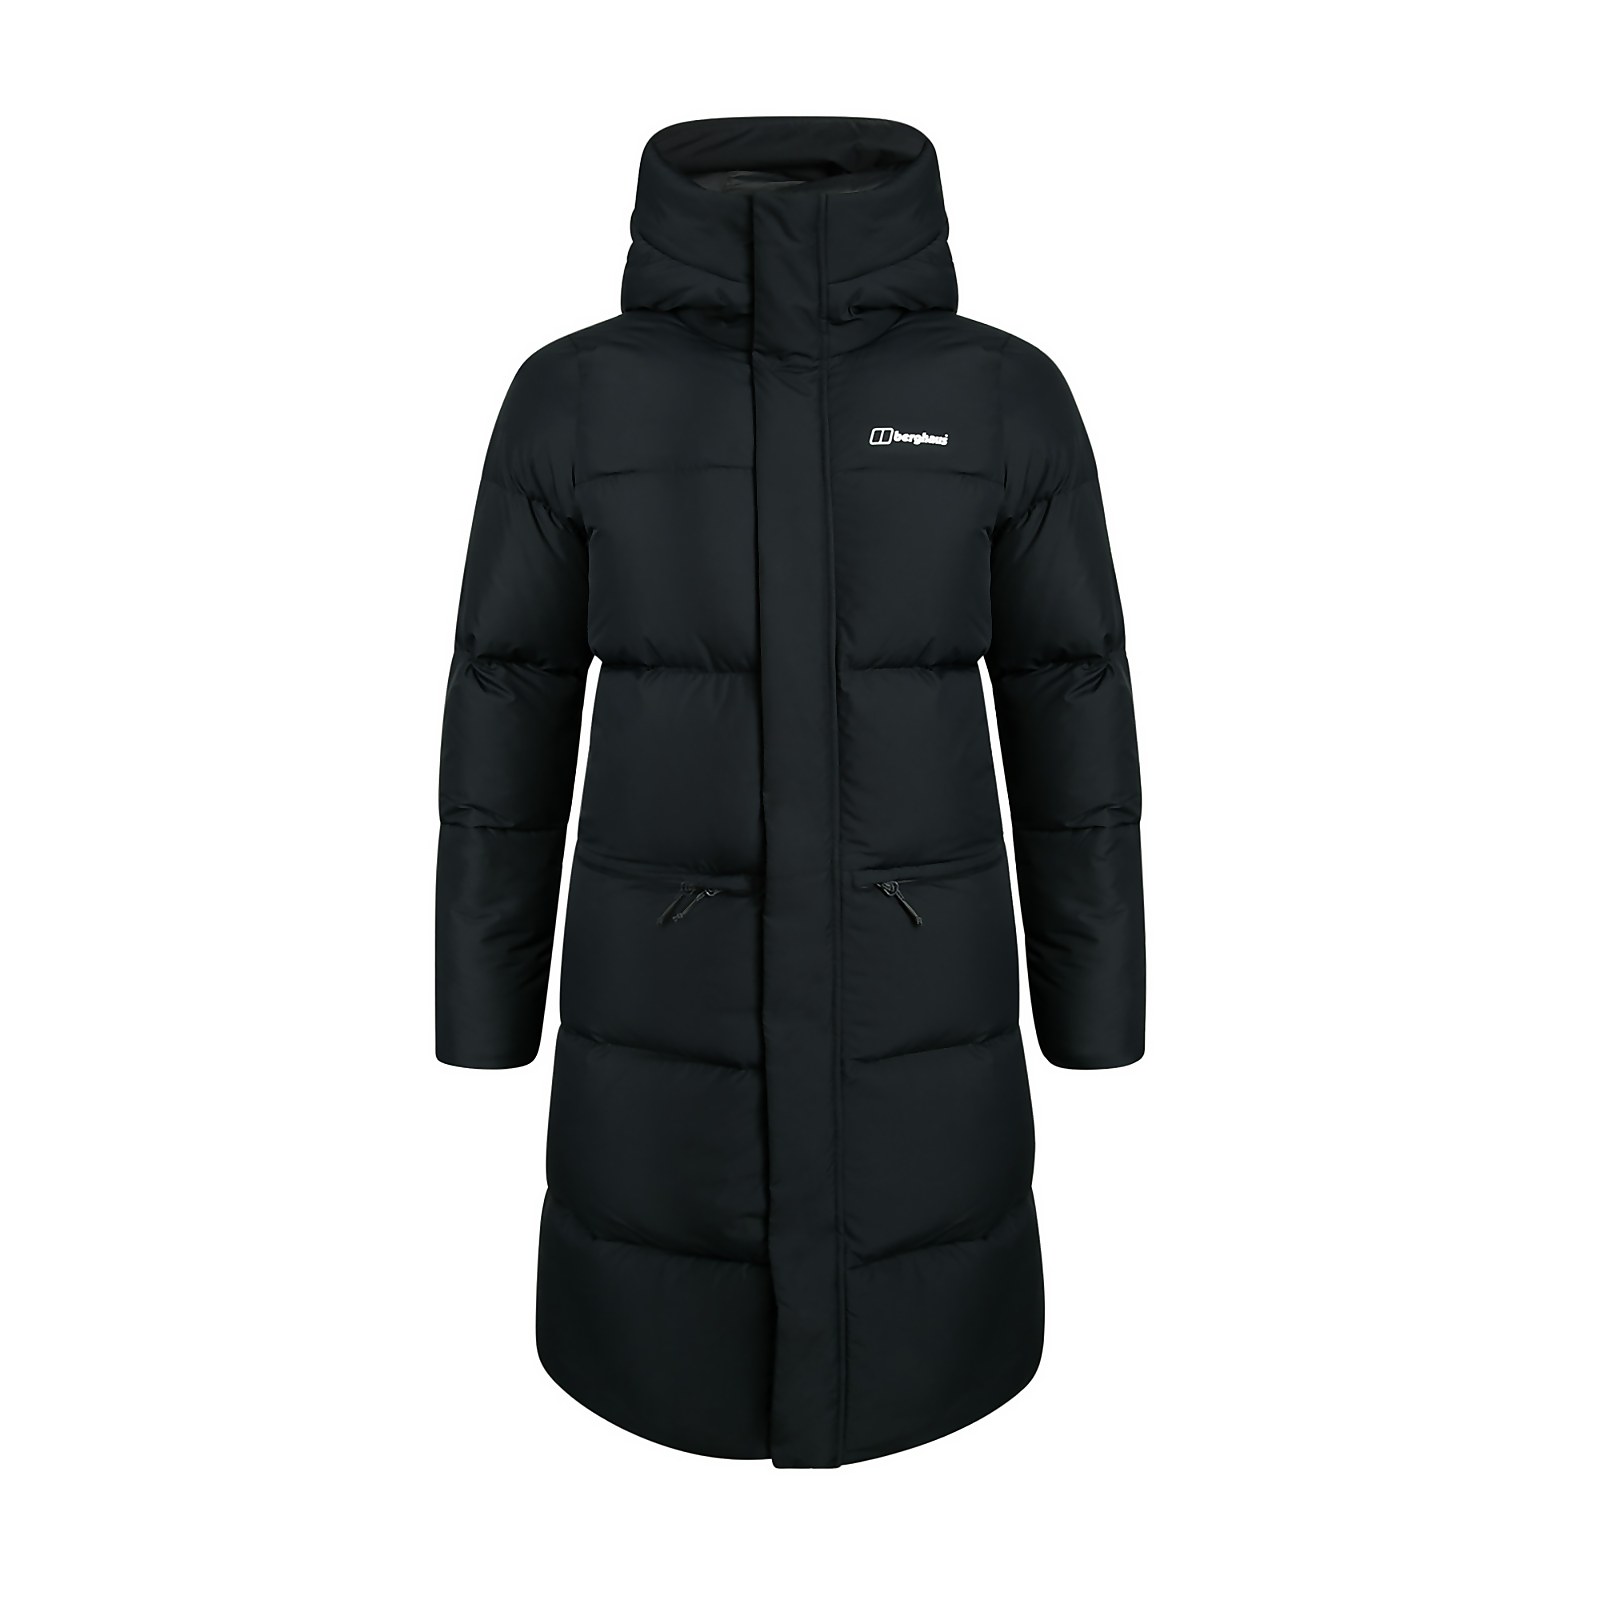 Berghaus Womens Combust Reflect Long Down Insulated Jacket - Black - 18